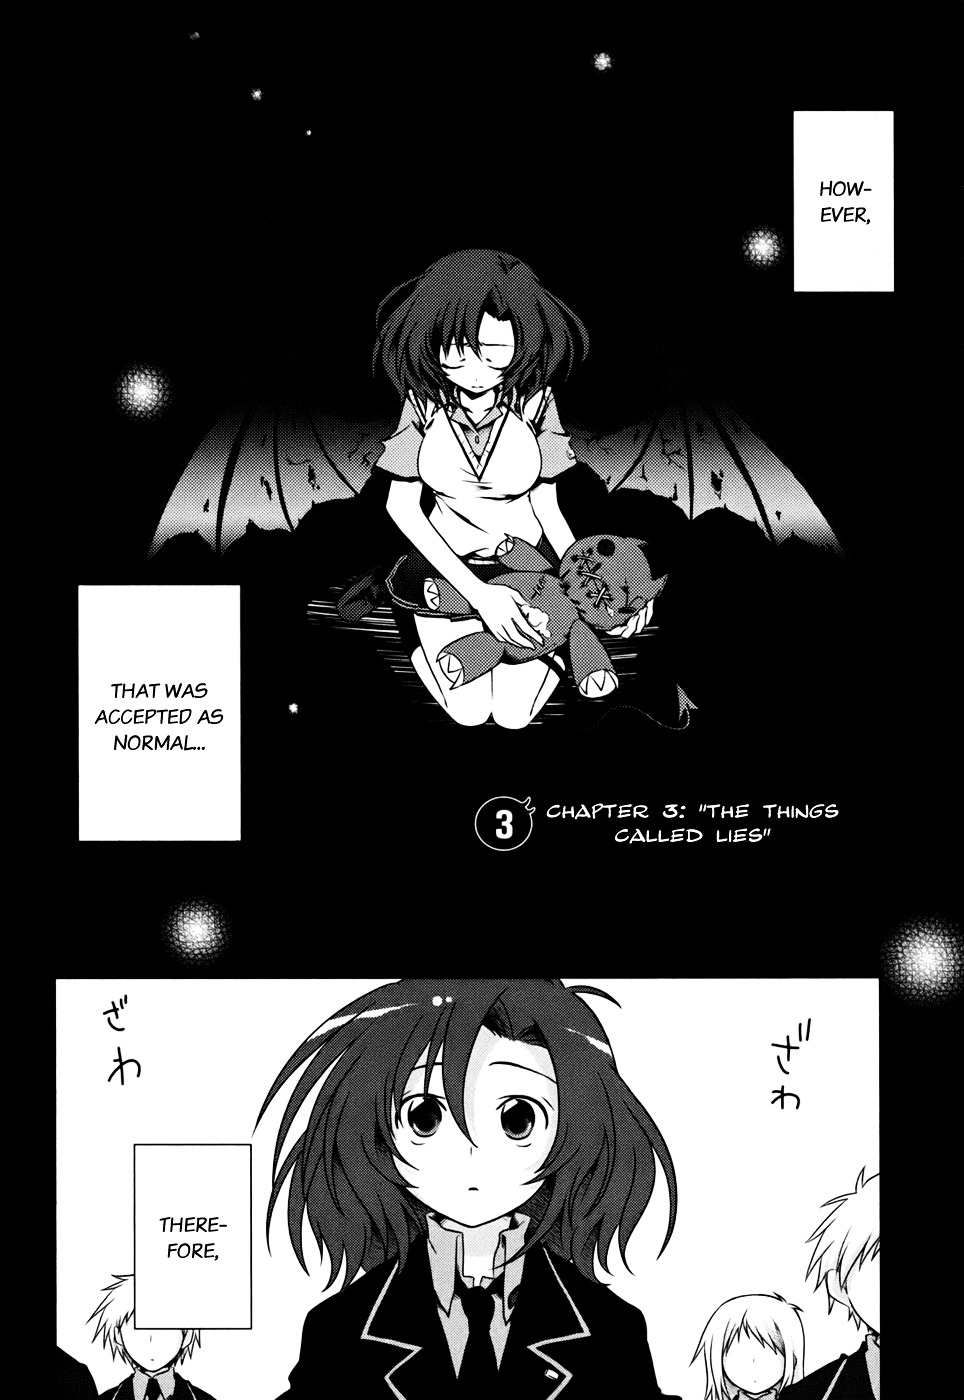 Iris Zero Vol.1 Chapter 3 : Episode 3 - The Things Called Lies - Picture 3